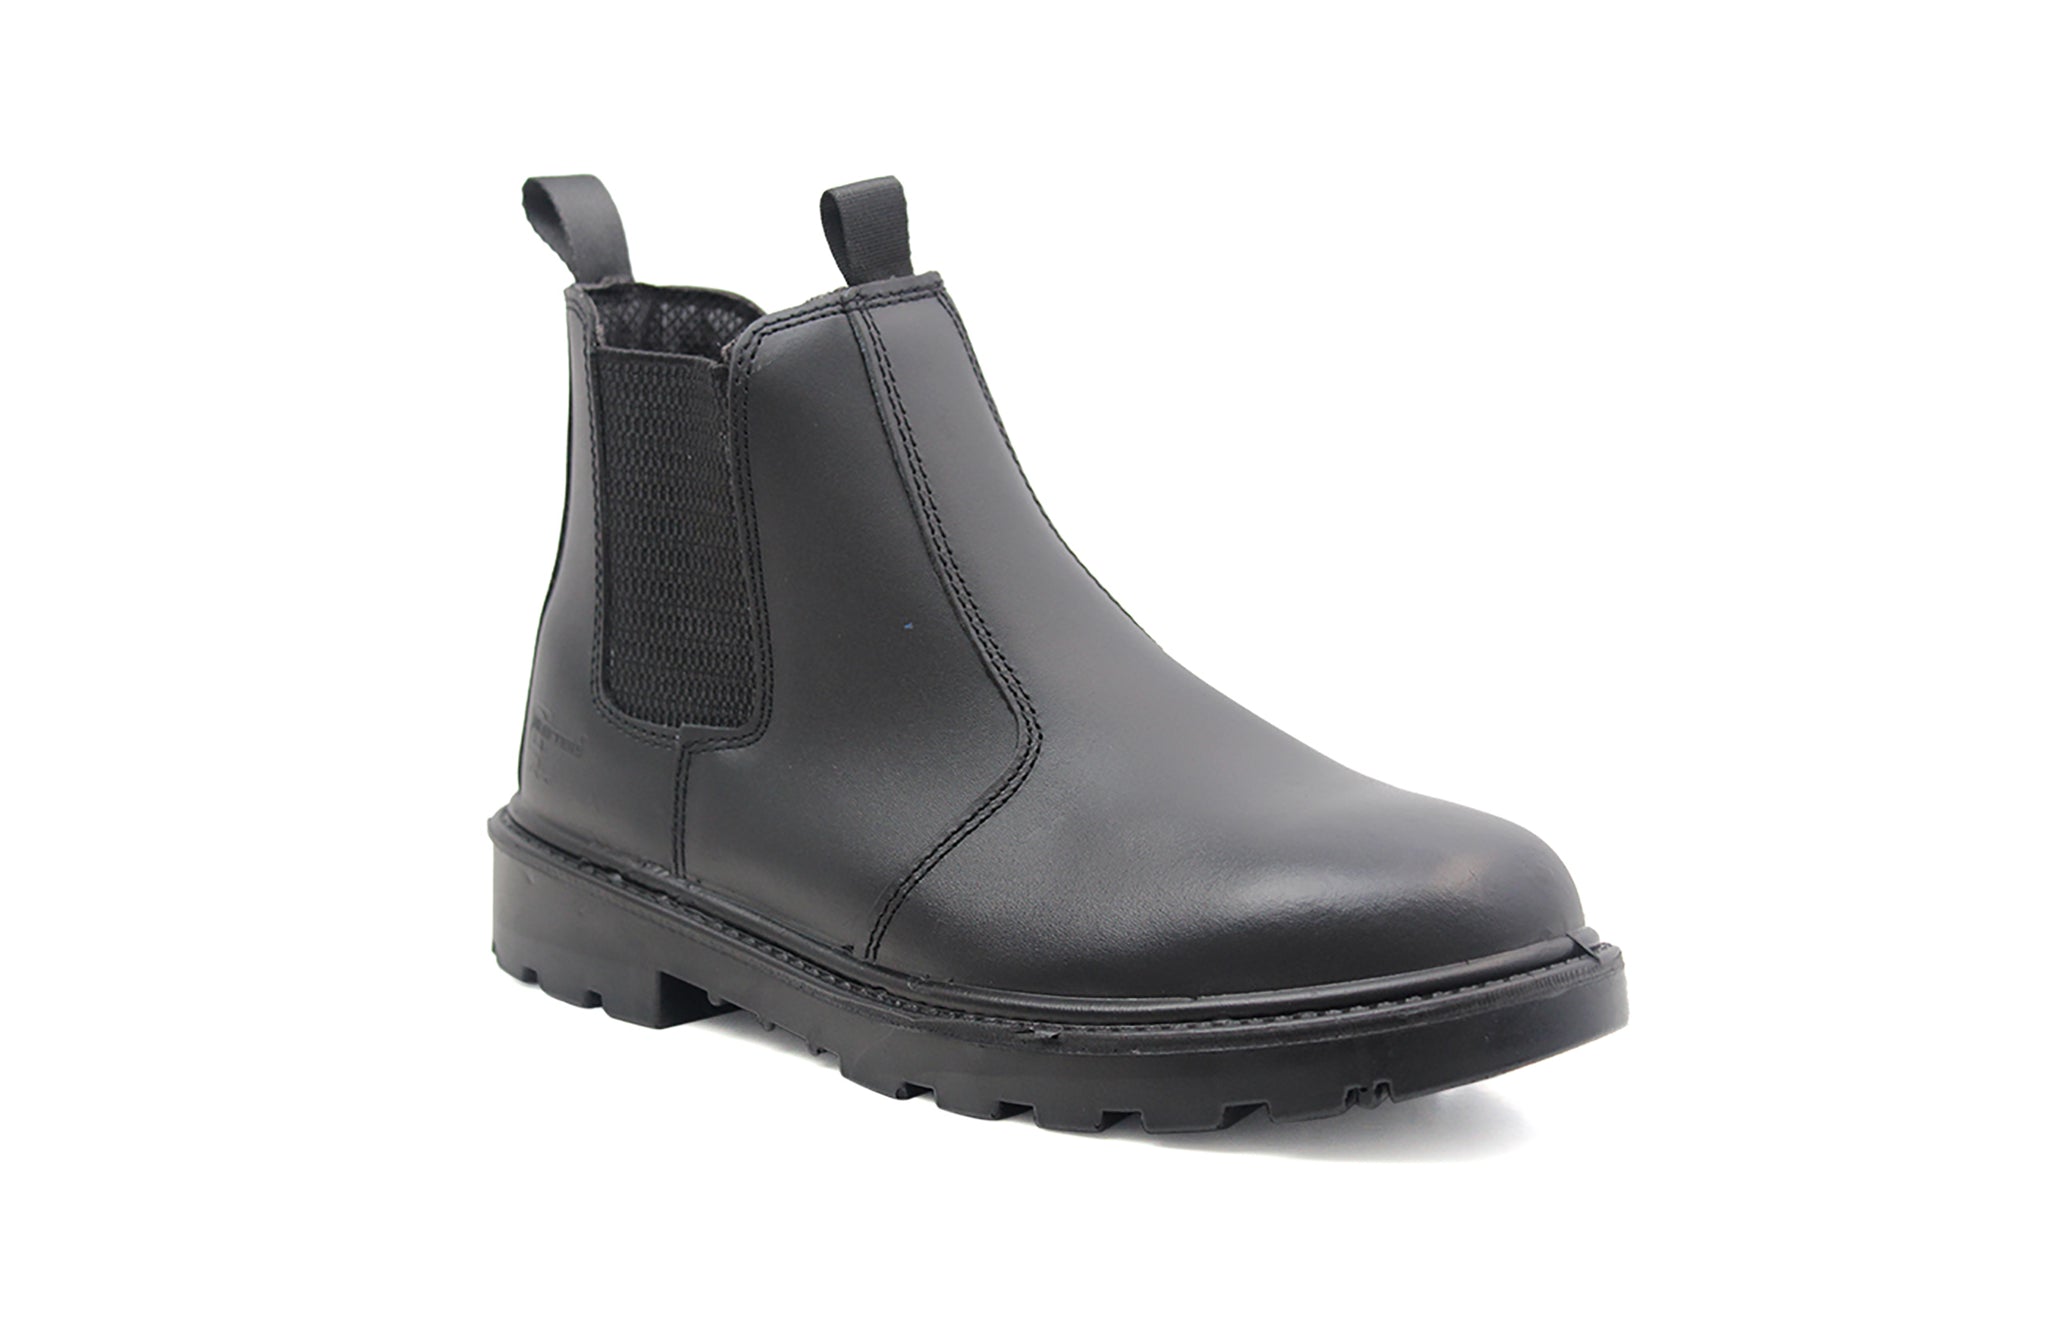 Grafters Mens Black Leather Steel Toe Cap Safety Dealer Boots